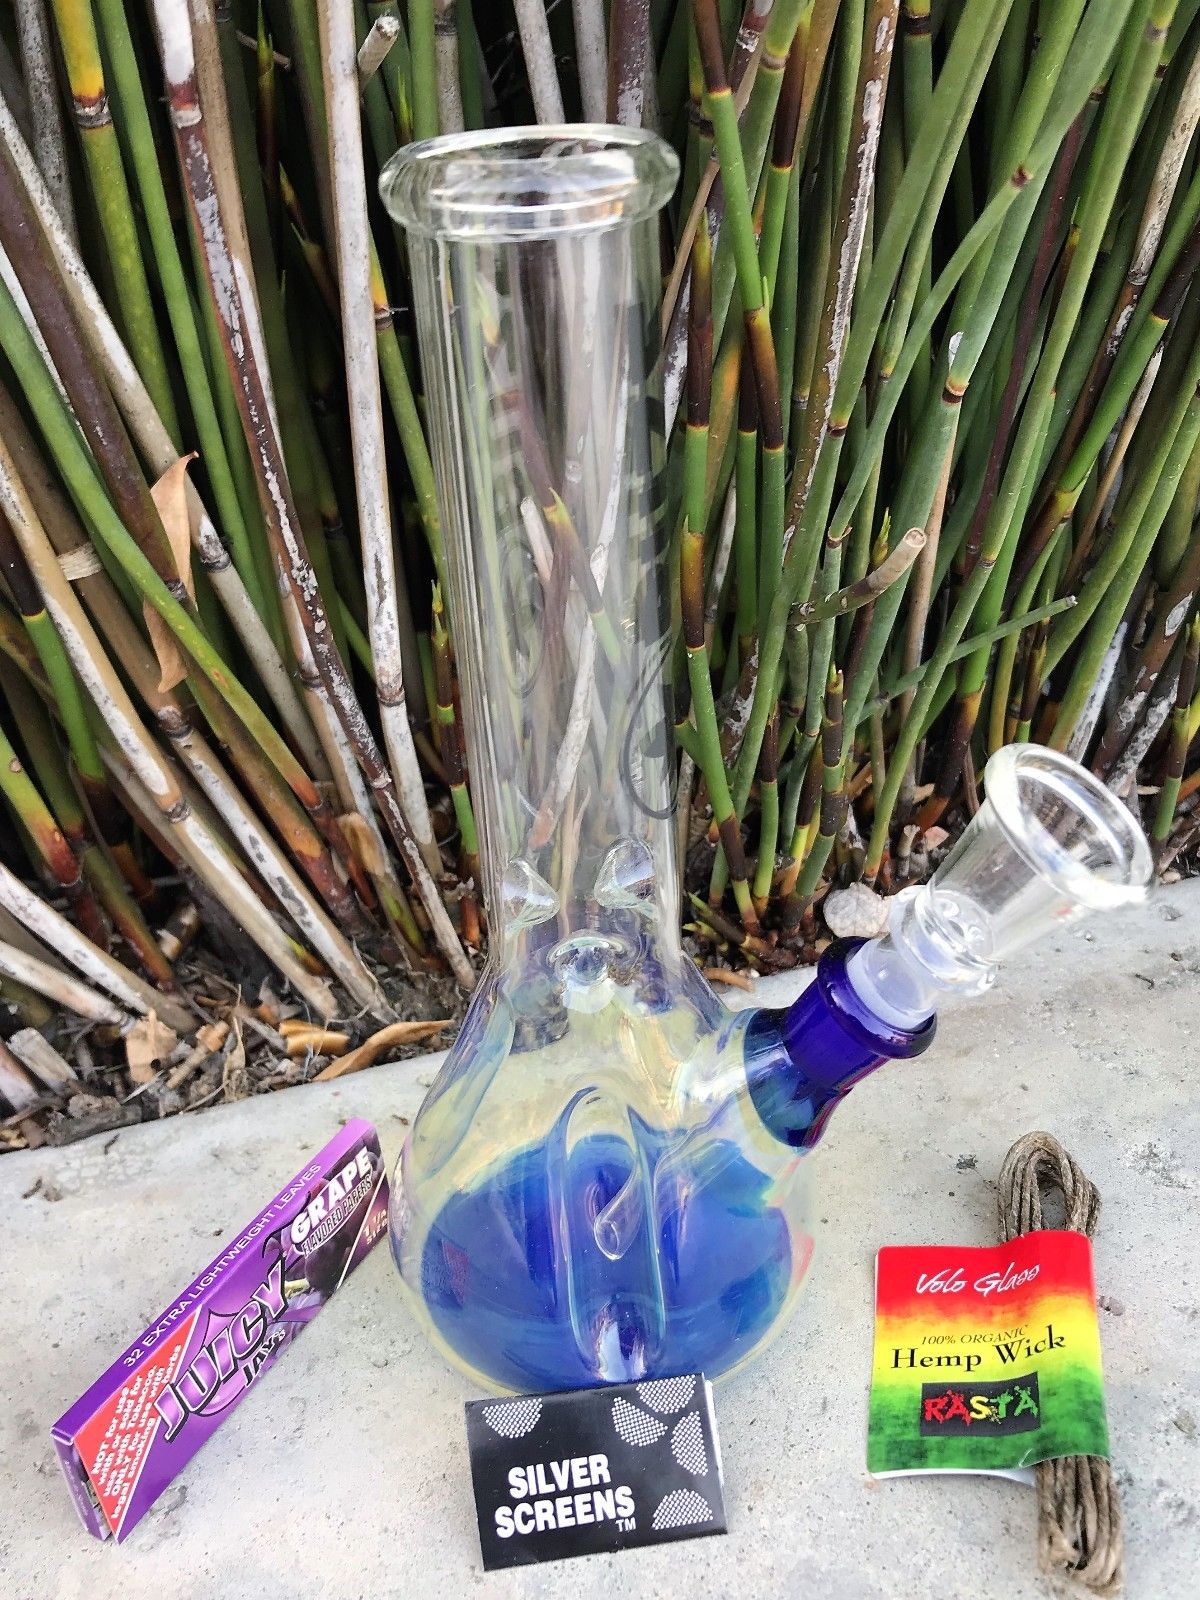 Green Smoking Rolling Tray / Holder / Plate ( RAW Style) - Mr. Purple -  Glass Water Pipes, Bongs, RAW Cones/Papers, And Much More